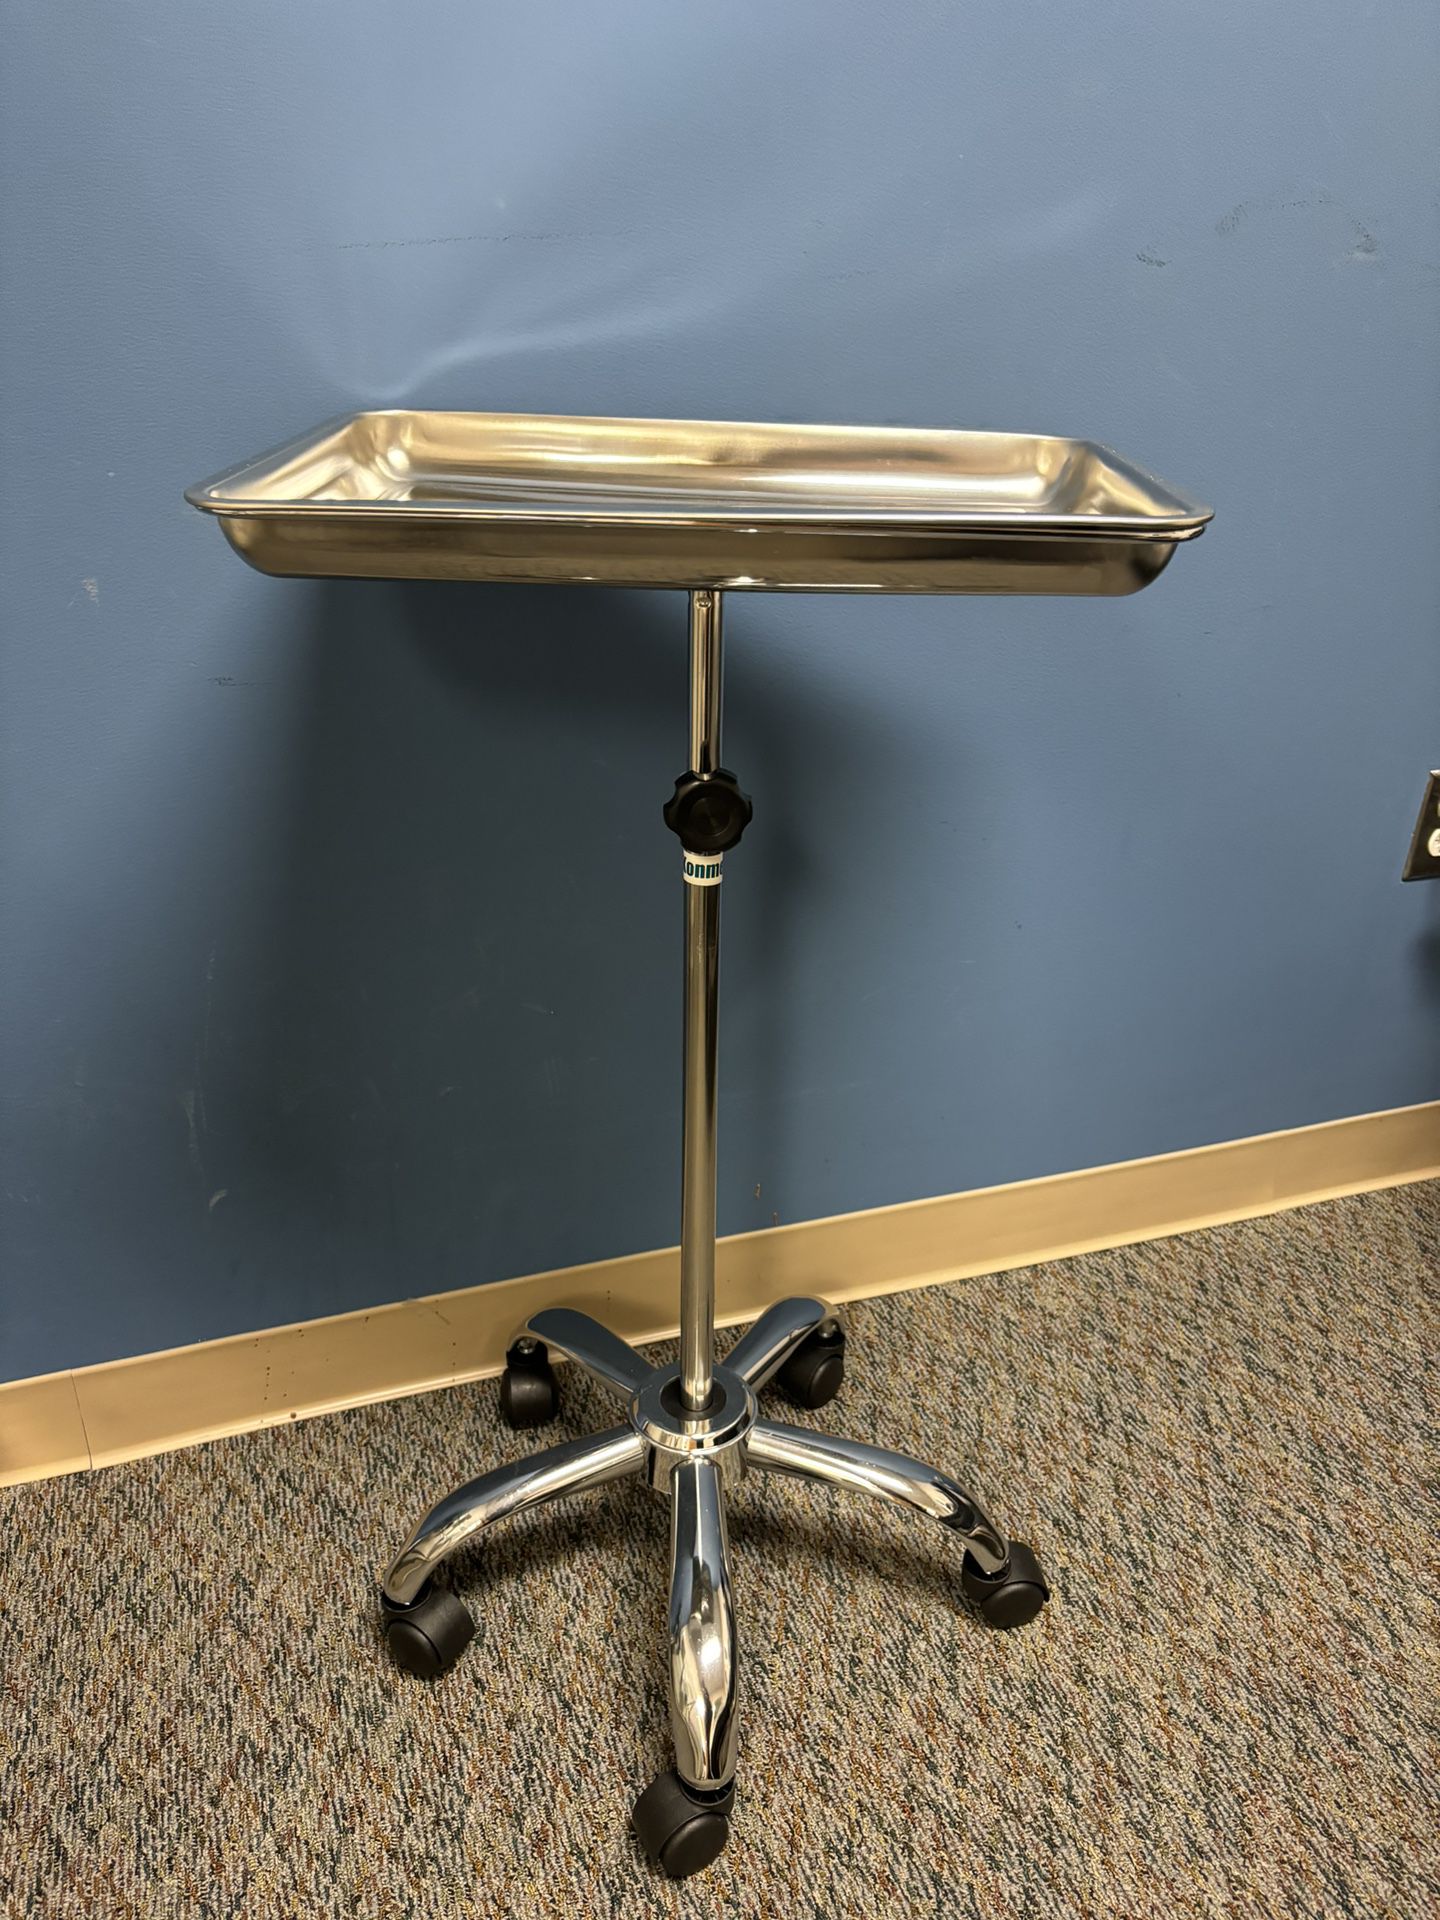 Rolling tray Table ** PROVIDE YOUR BEST OFFER**